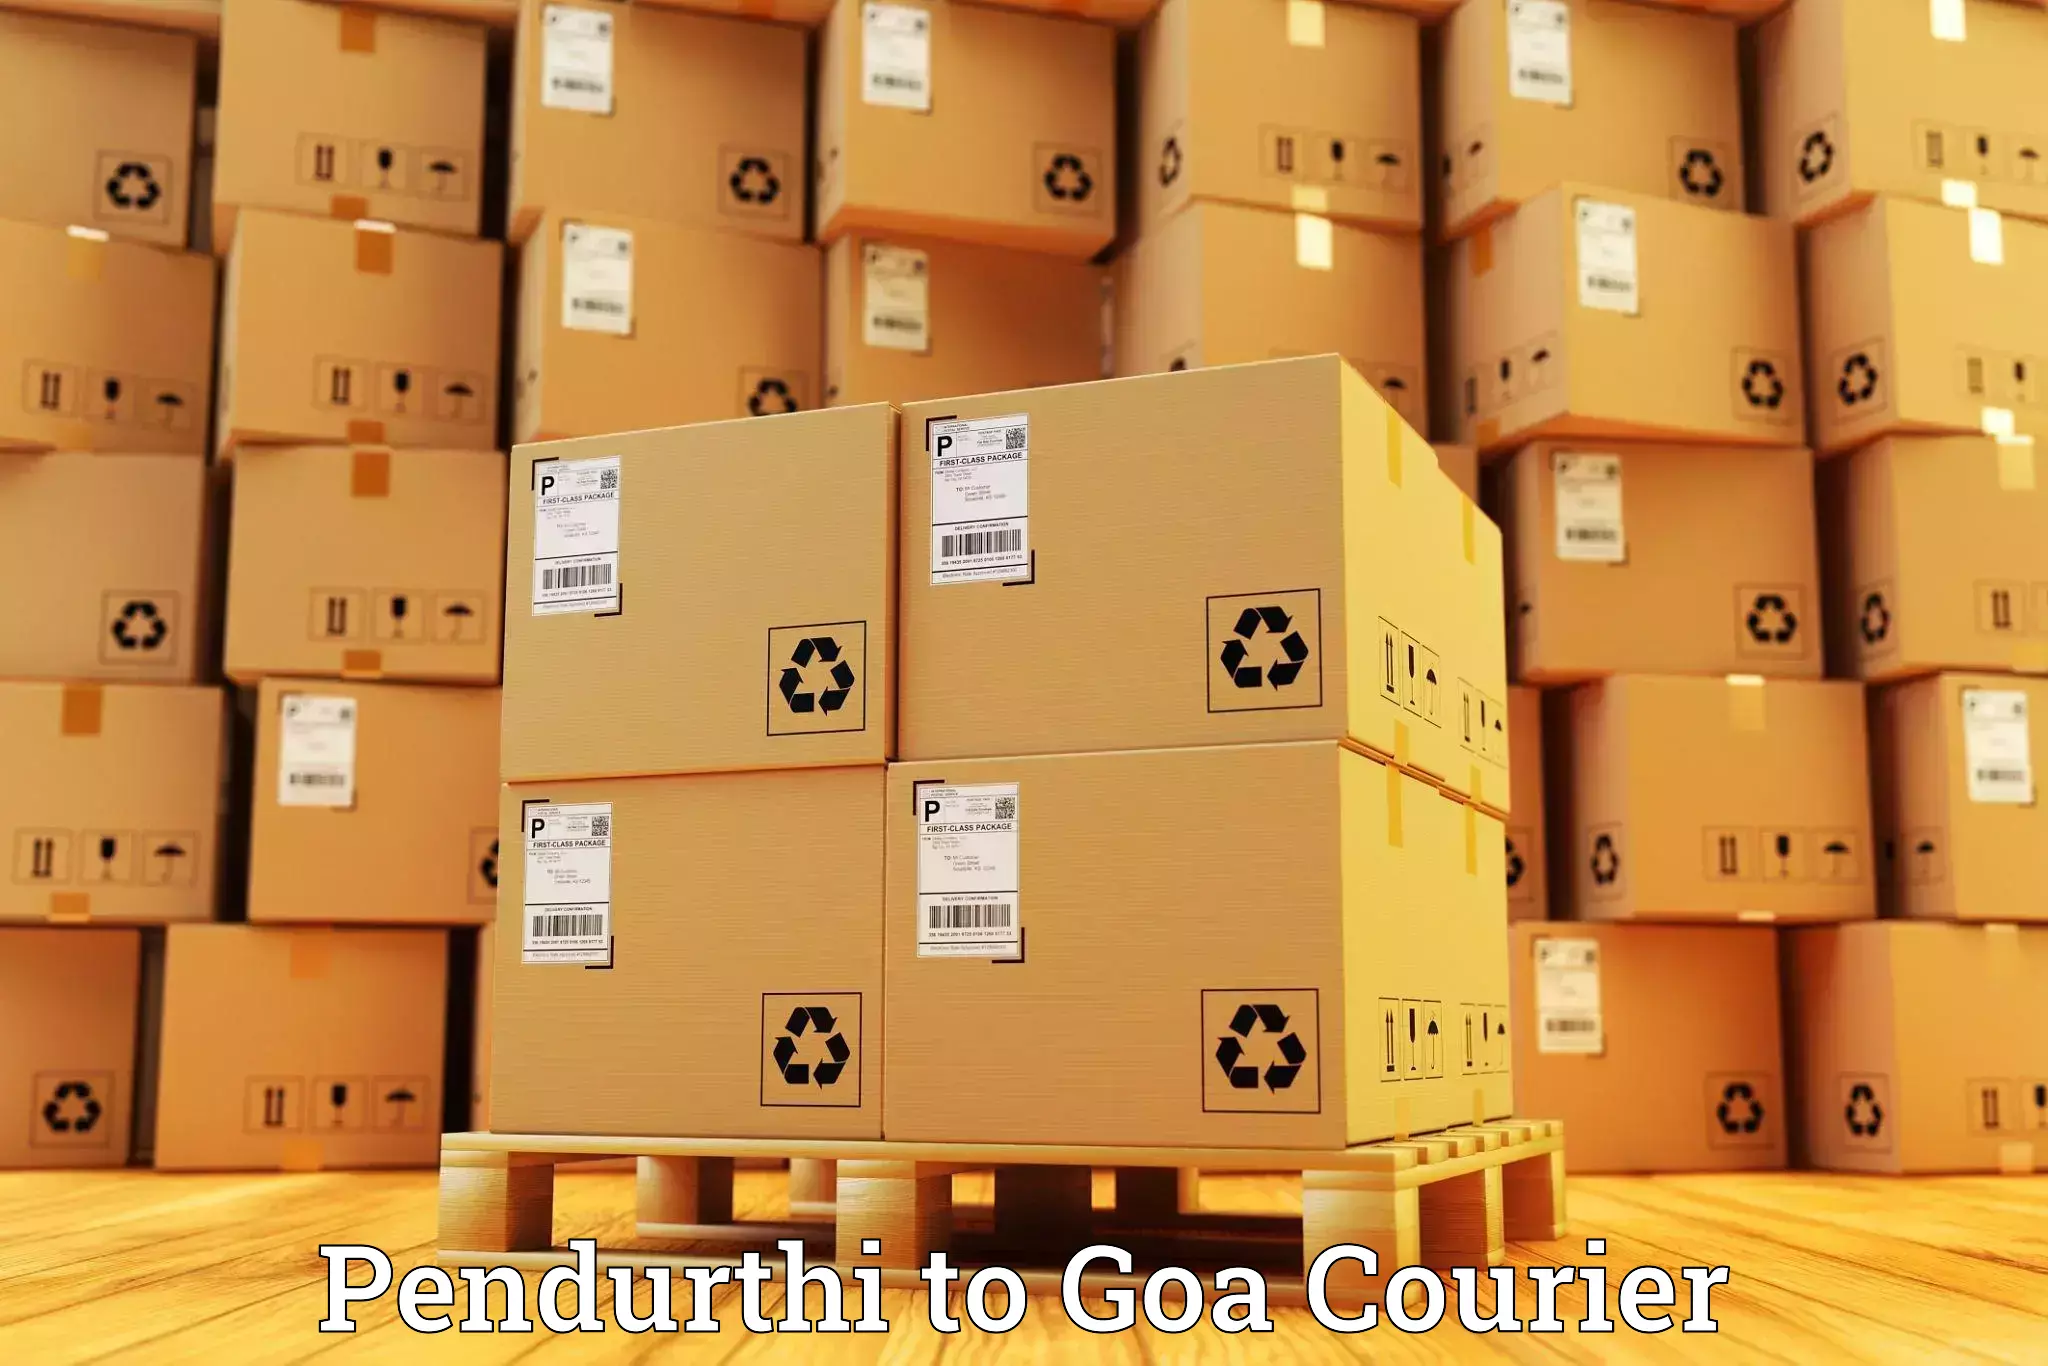 Global courier networks Pendurthi to Goa